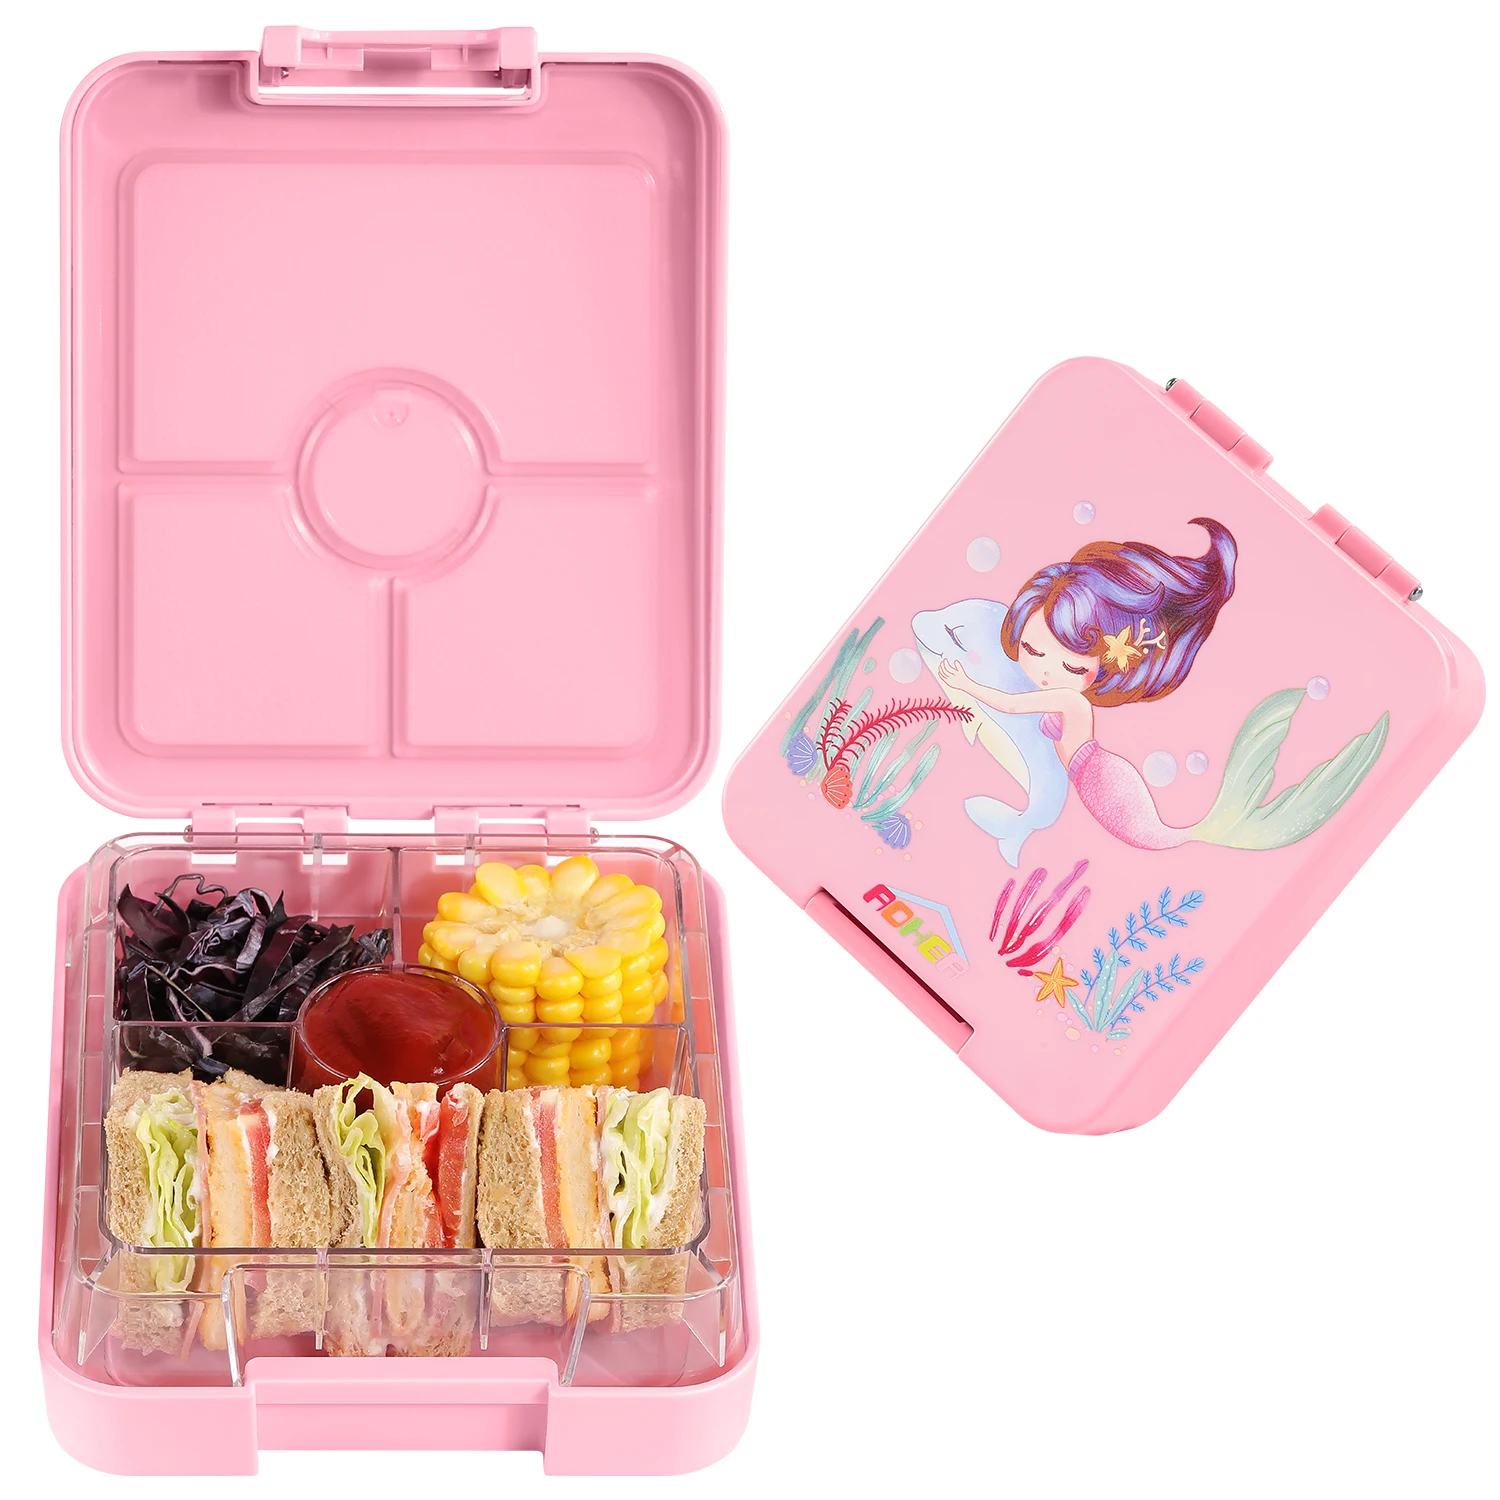 https://ae01.alicdn.com/kf/S81867614b6164c6690c130d1e611e556t/AOHEA-Bento-Lunch-Box-for-Kids-Mermaid-Bento-Boxes-4-Compartment-Toddler-Bento-Containers-for-Daycare.jpg